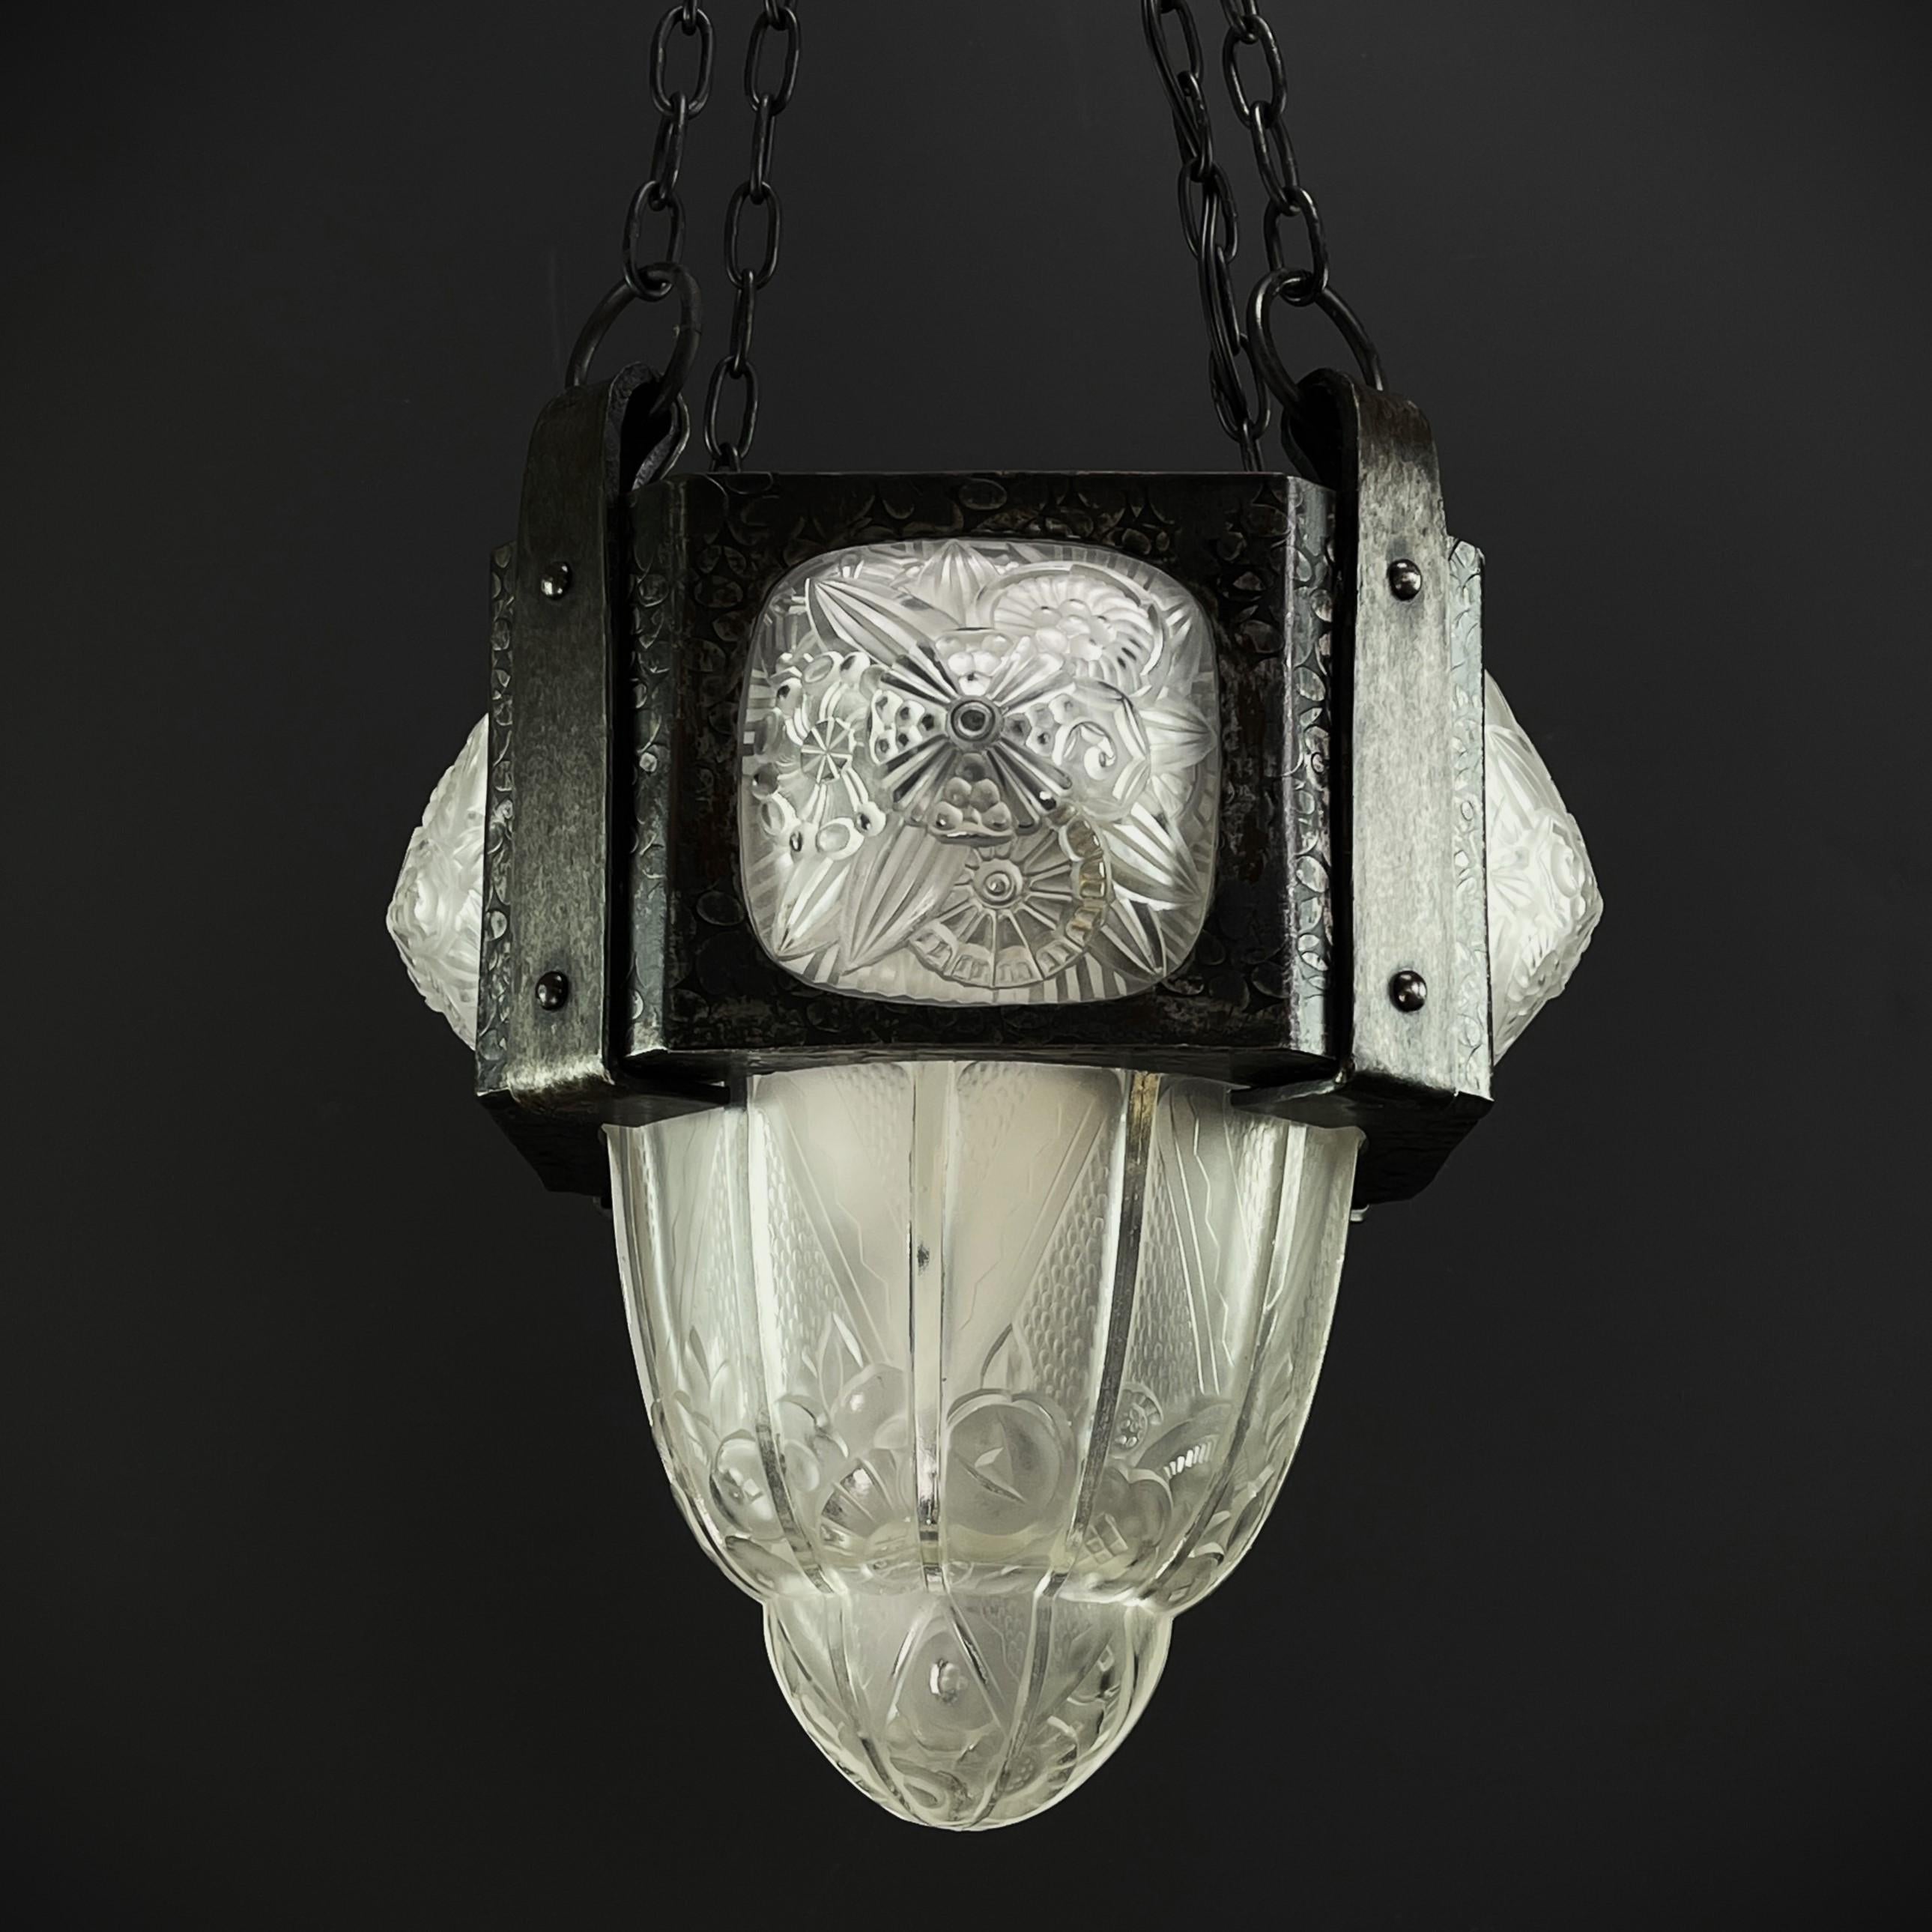 ART DECO lamp Hettier & Vincent wrought iron chandelier 1930s

The Hettier & Vincent ART DECO ceiling lamp is a fascinating example of the masterful craftsmanship and exquisite design of this renowned French glass manufacturer. This signed ceiling